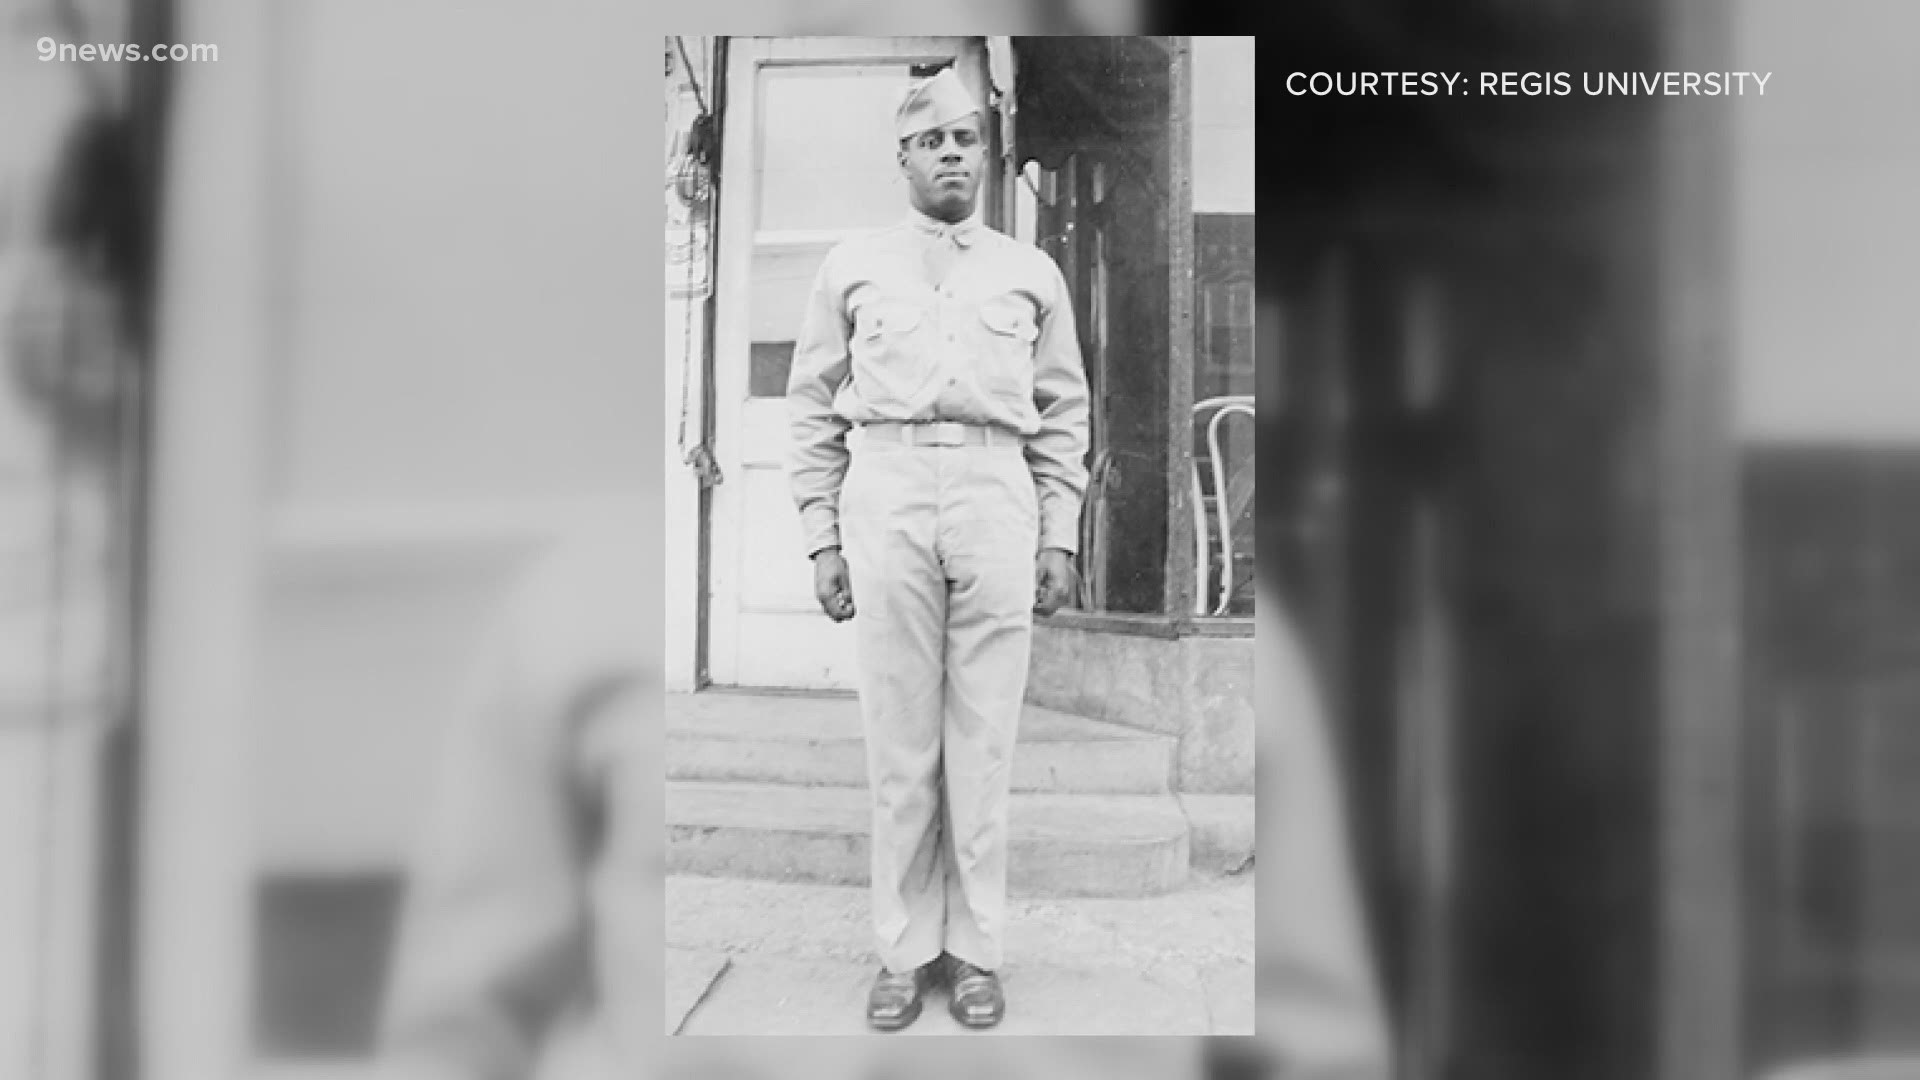 In 1941, Walter Springs, a Black man, left Regis College in Denver to serve his country. There is now a scholarship in his honor.